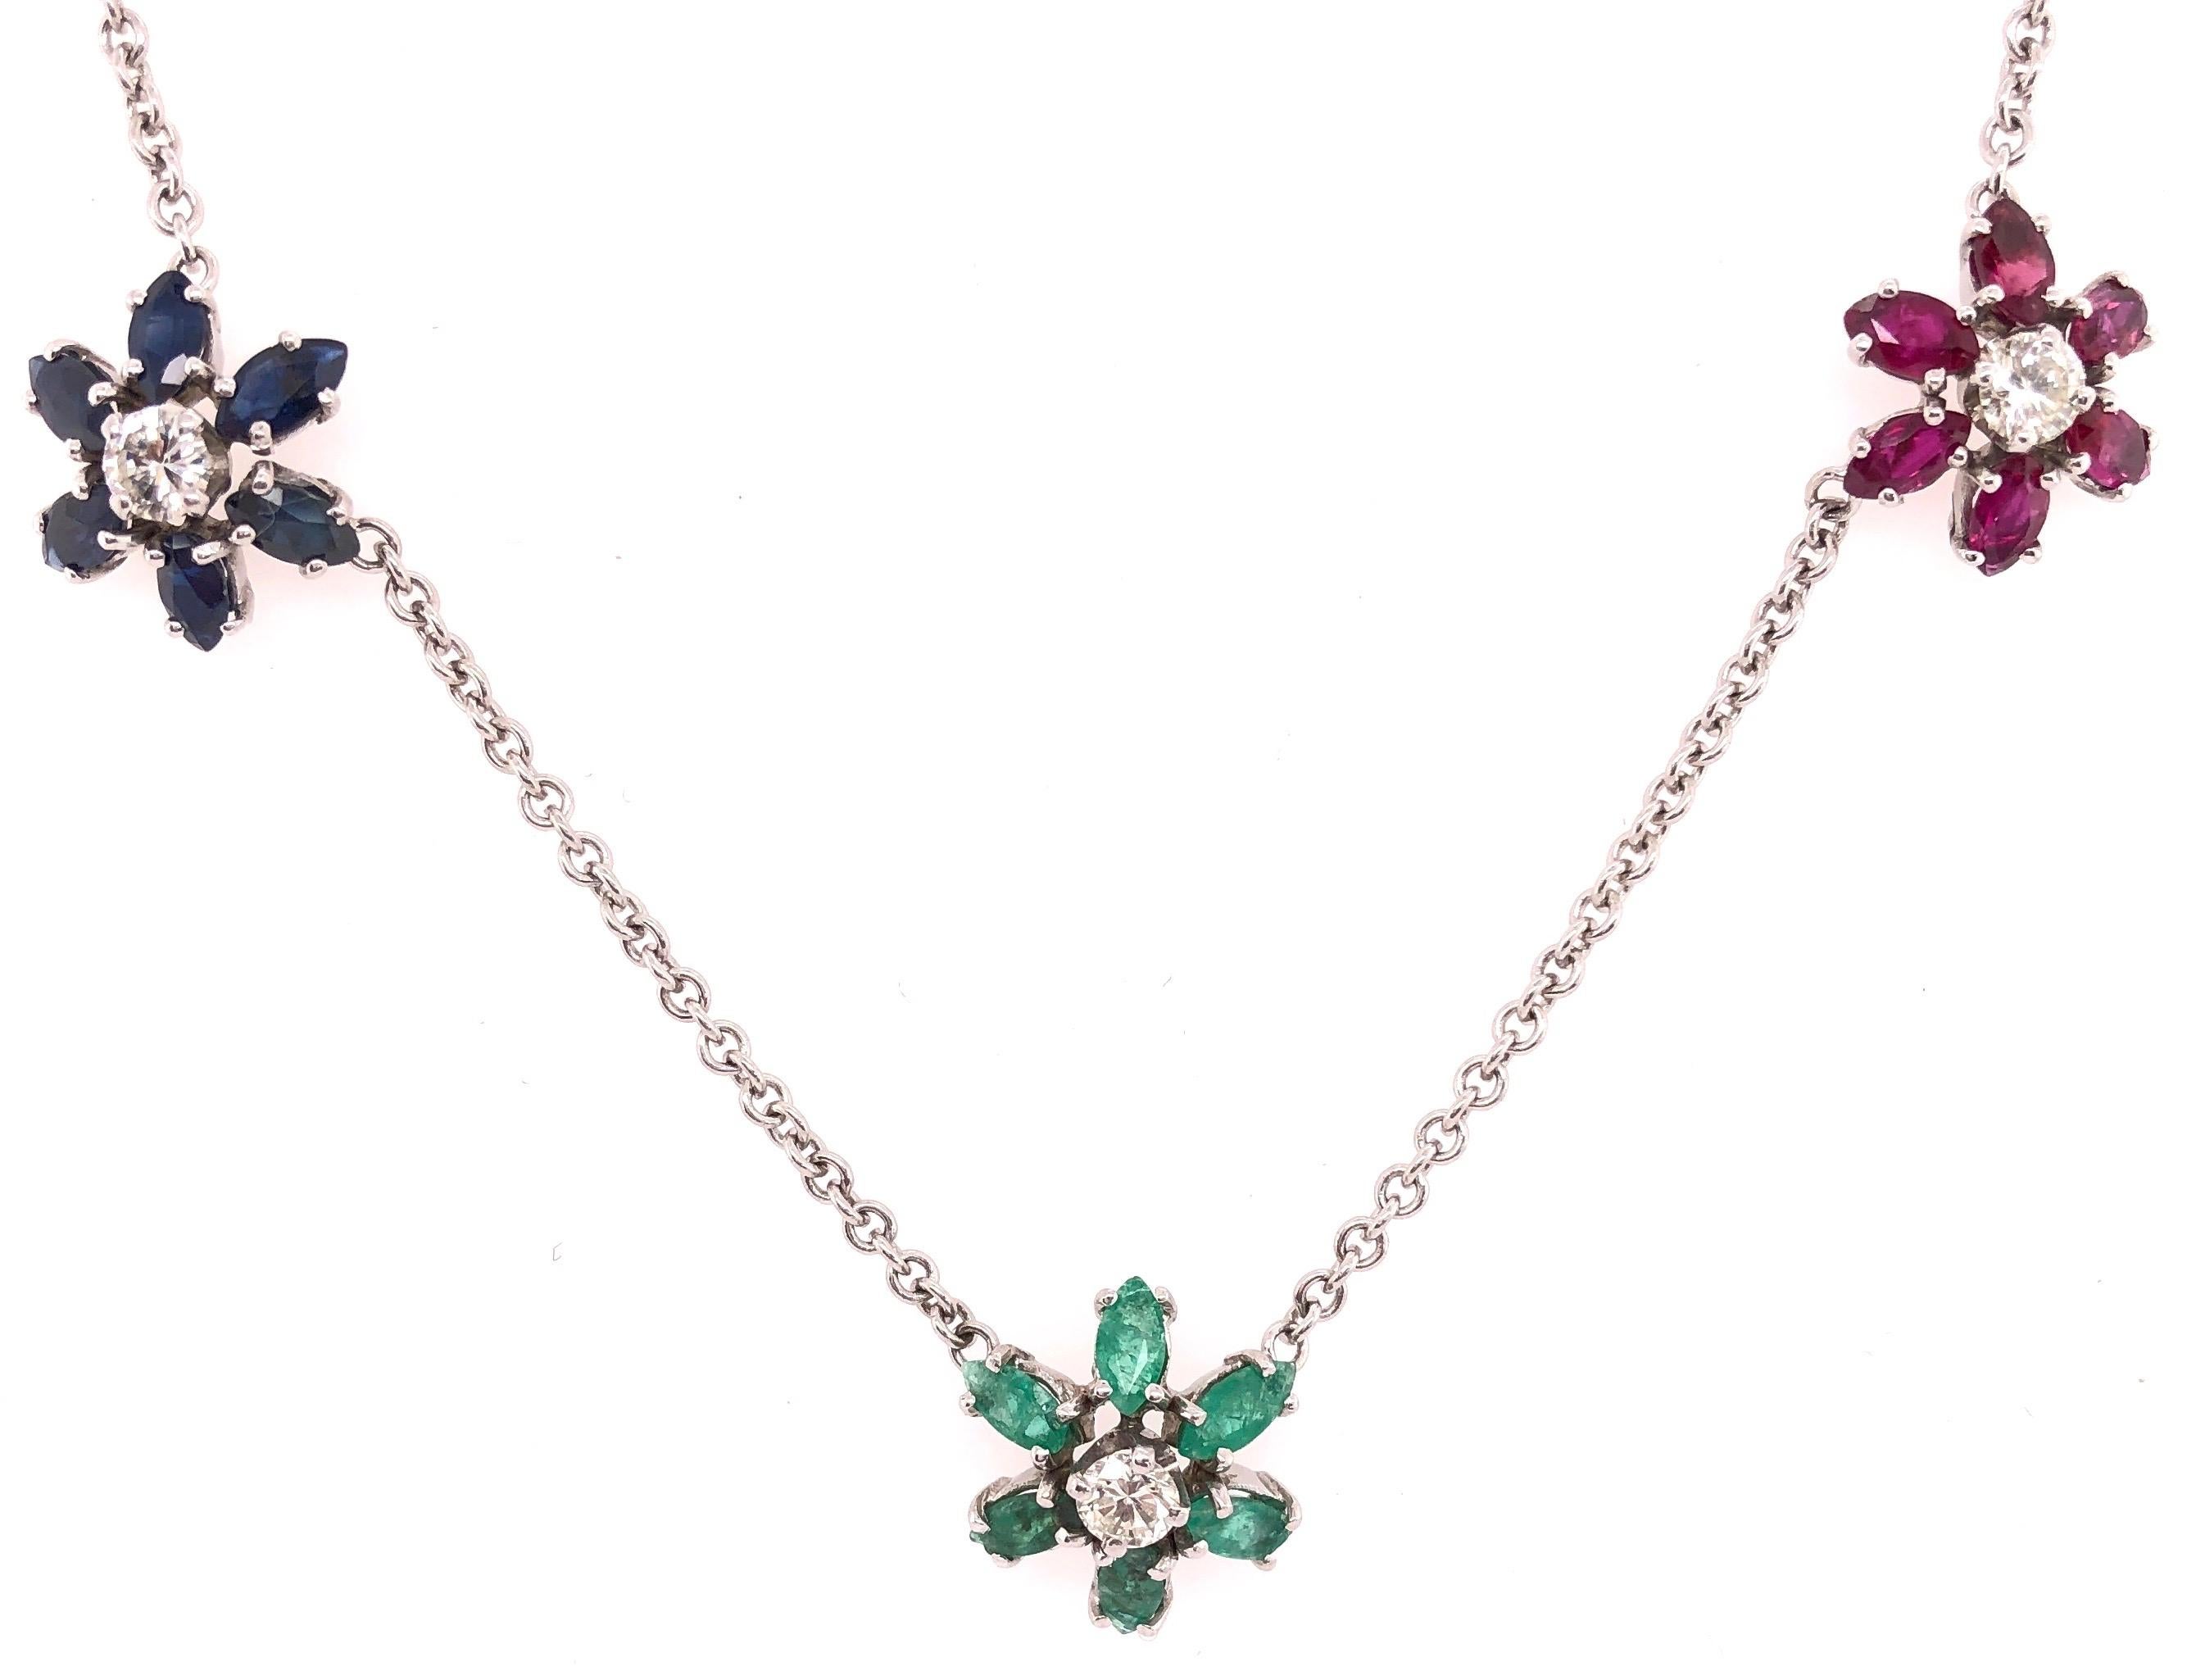 14 Kt White Gold Necklace with 3 Flowers In Ruby, 6 approx 1.50 Total Weight,  Sapphire, approx 1.50 Total Weight and  Emerald 1.50 Total Weight with
0.75 Round Total Diamond Weight. The necklace itself weighs 9 grams in total. 16 Inches. 